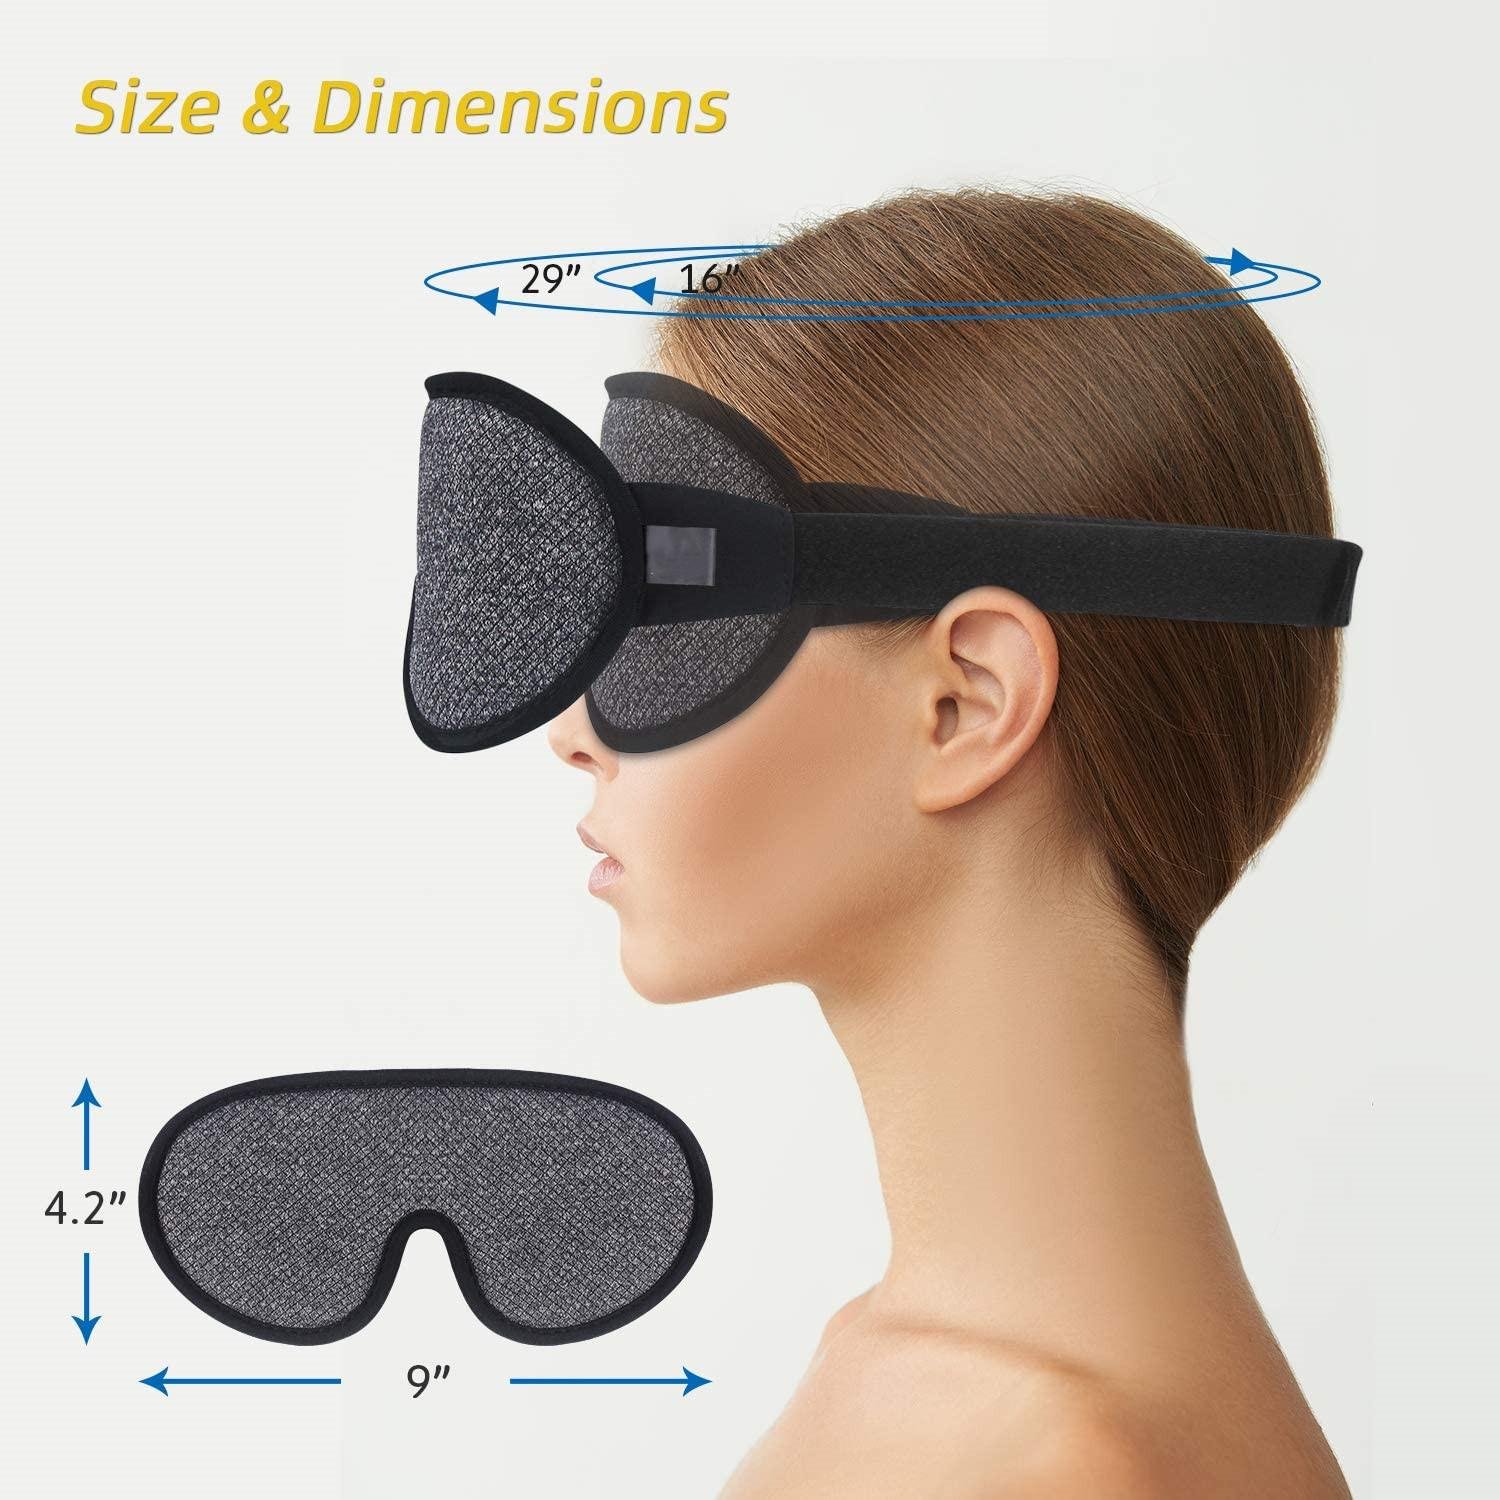 2020 New products Newest Item 3d sleep mask sleeping eye mask for sale 4